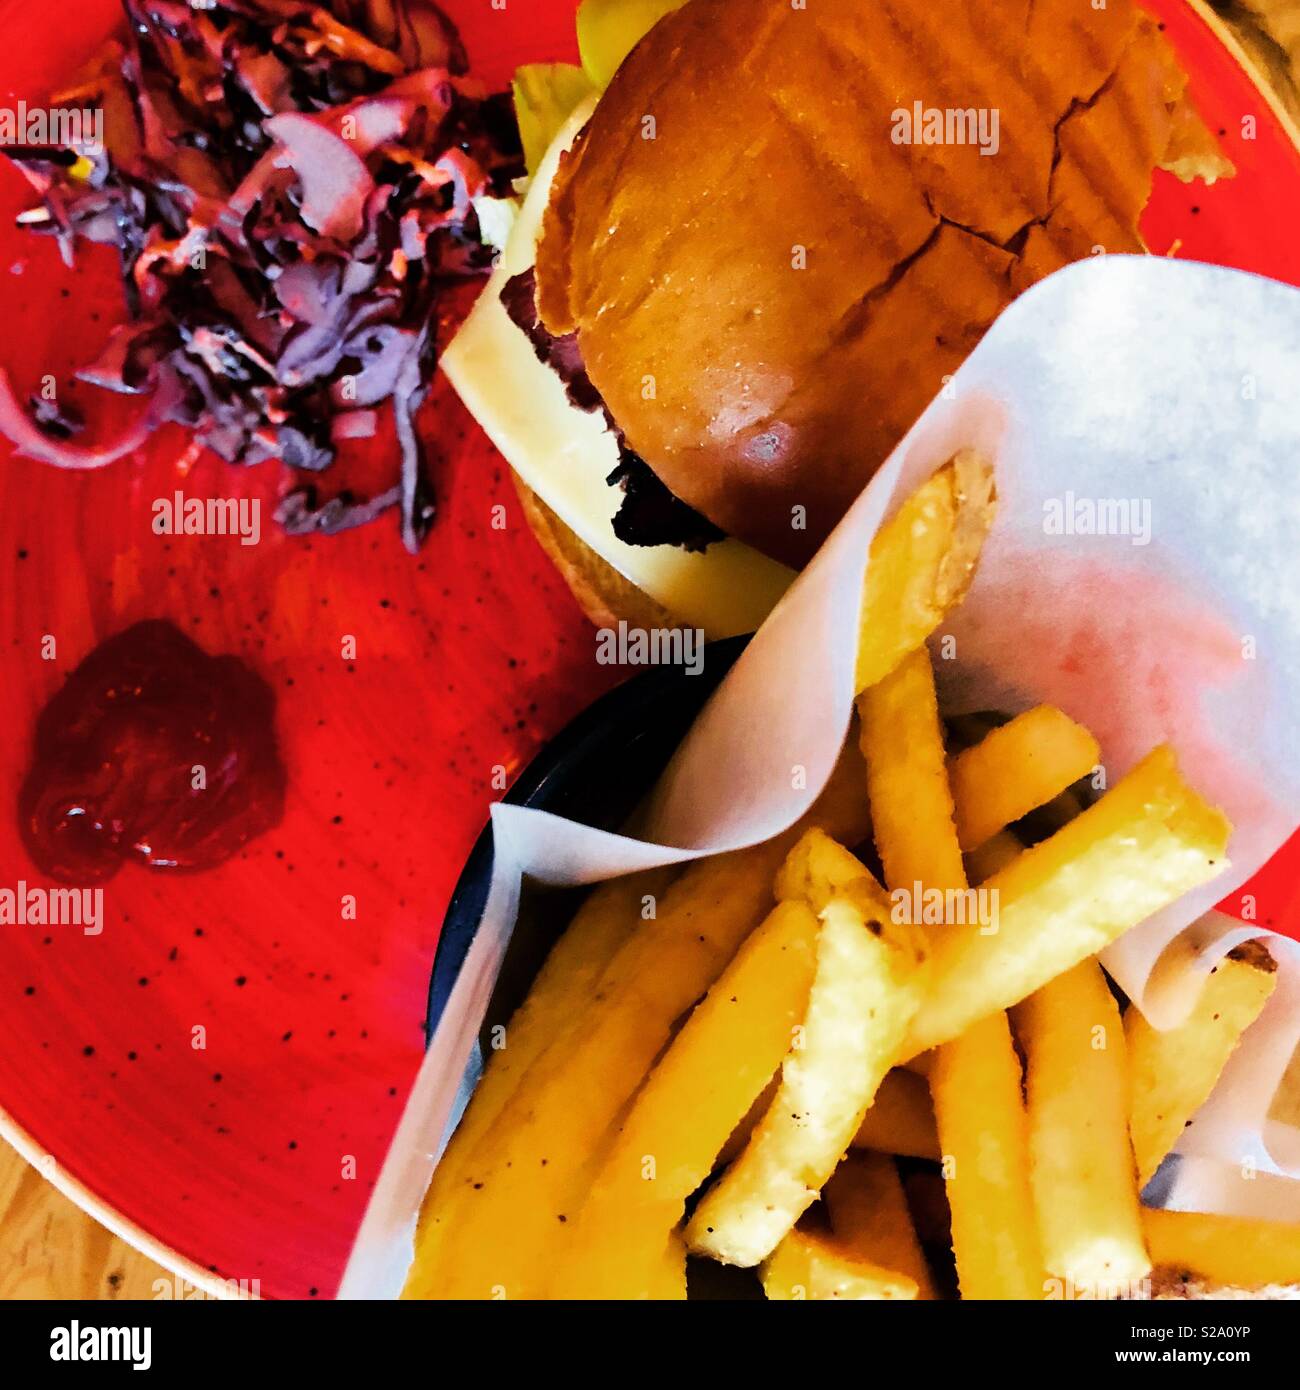 Deli style burger with red slaw and chips Stock Photo